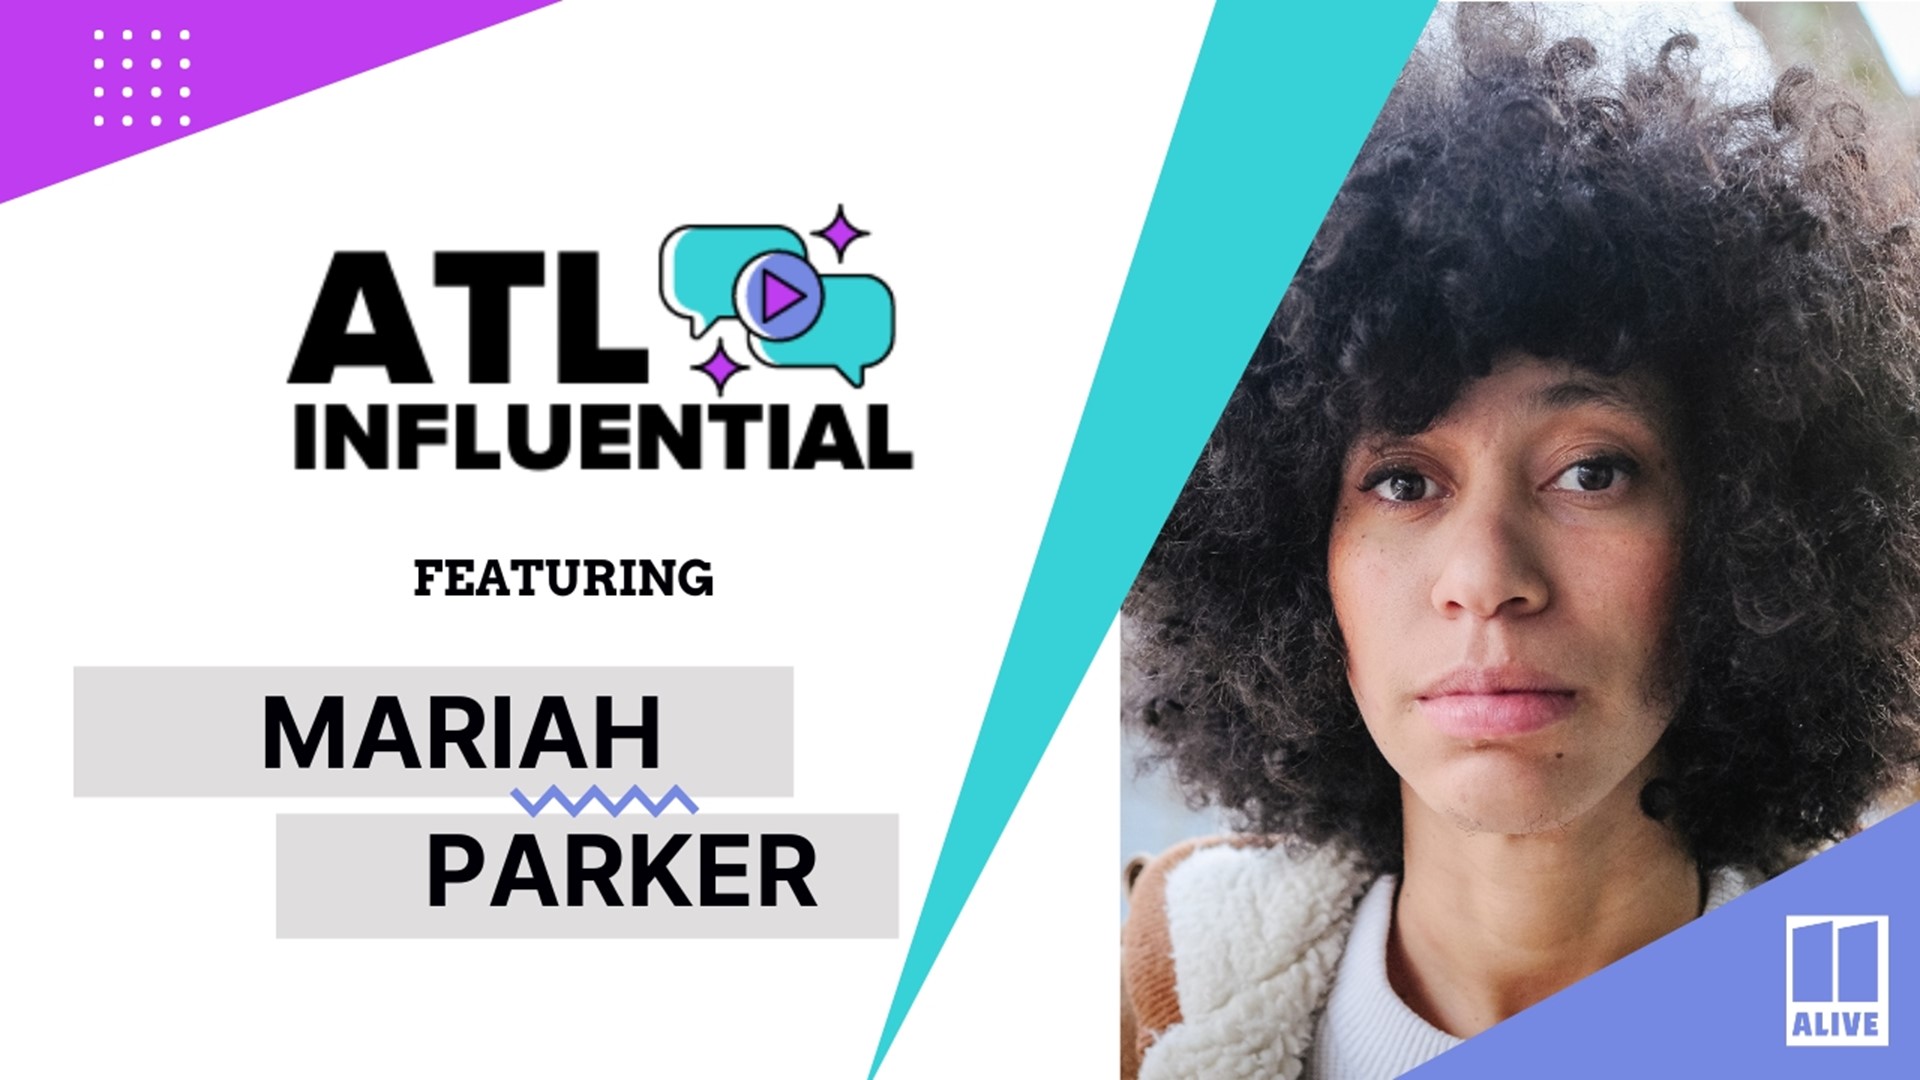 ATL Influential host, Tianne Johnson interviews Mariah Parker, Rapper & Athens-Clarke County Commissioner on how she handles both careers while being a mother.